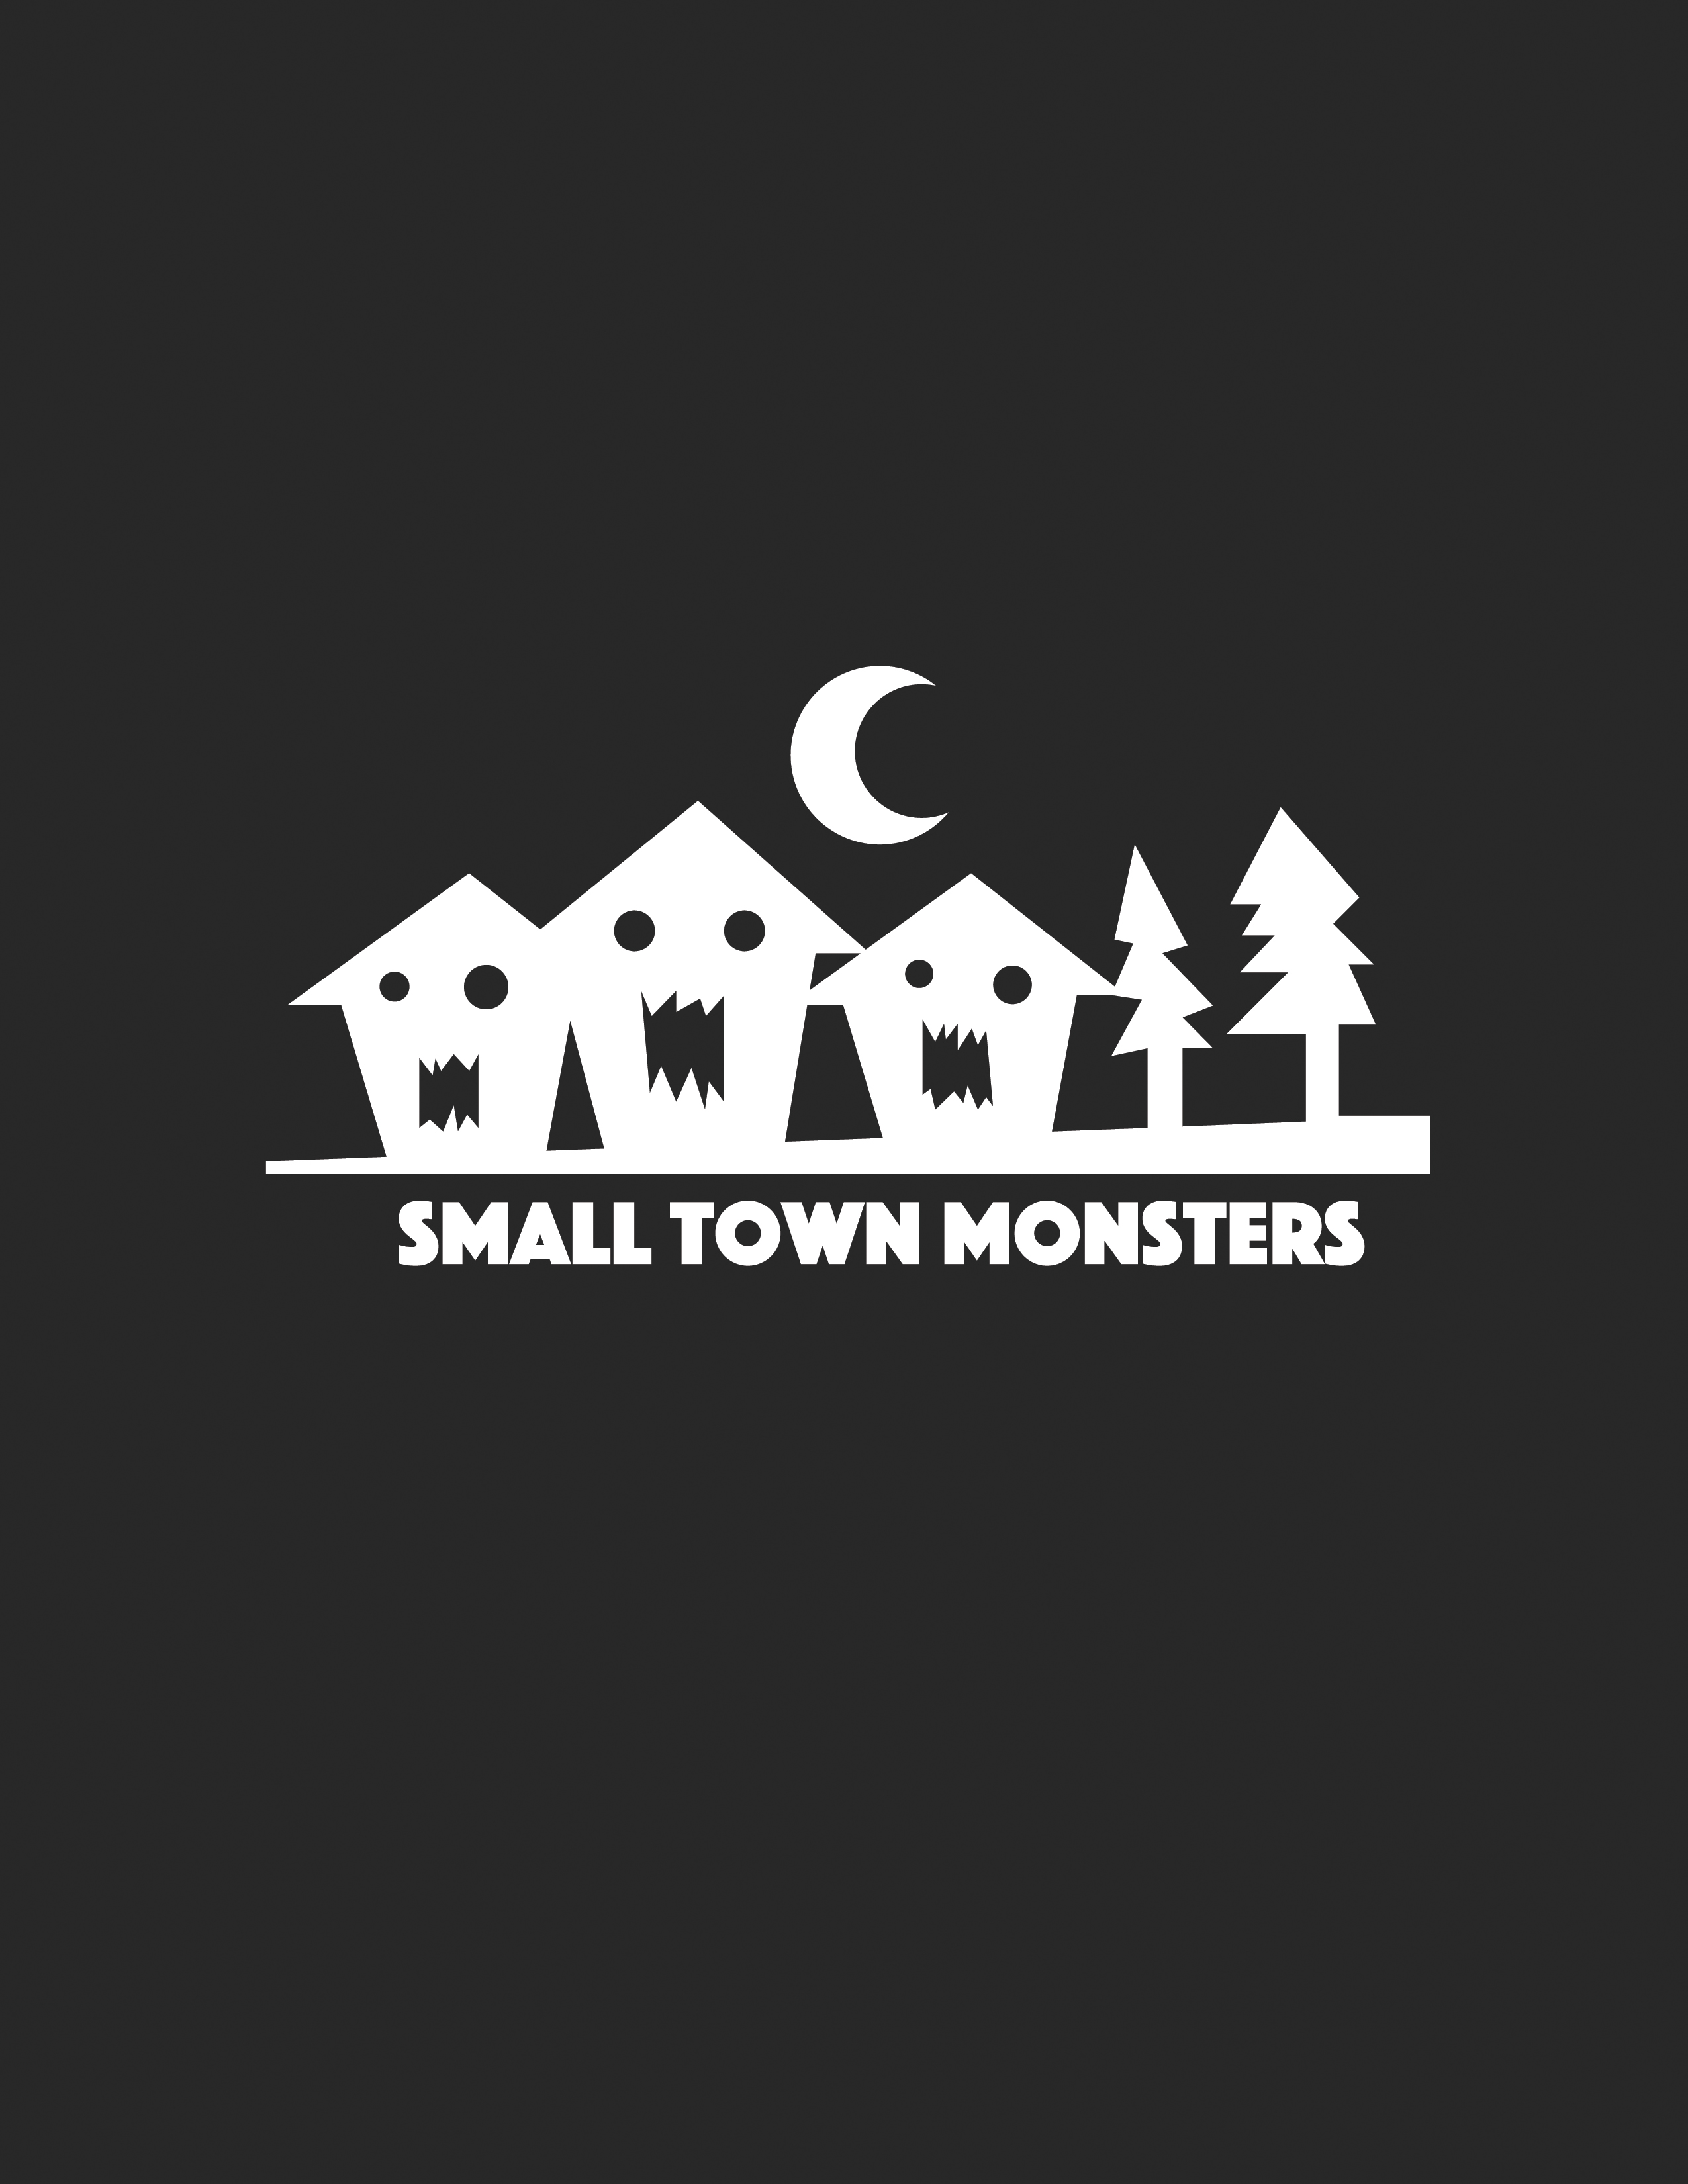 Episode 27: Small Town Monsters presents Minerva Monster